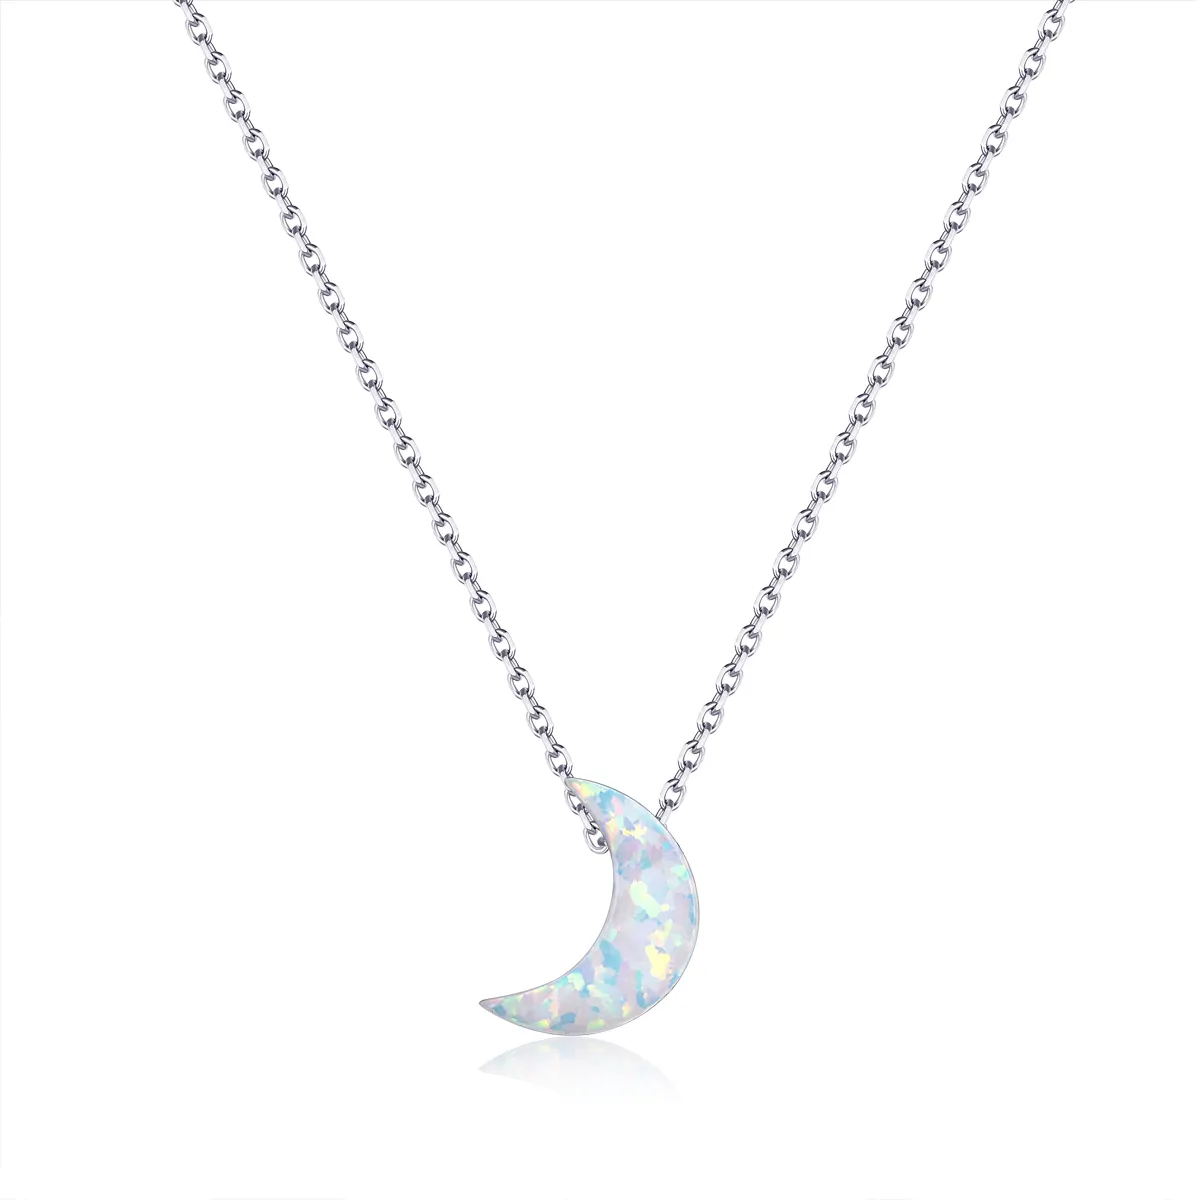 Hot sale Synthetic opal moon charm pendant 925 silver necklace for jewelry making